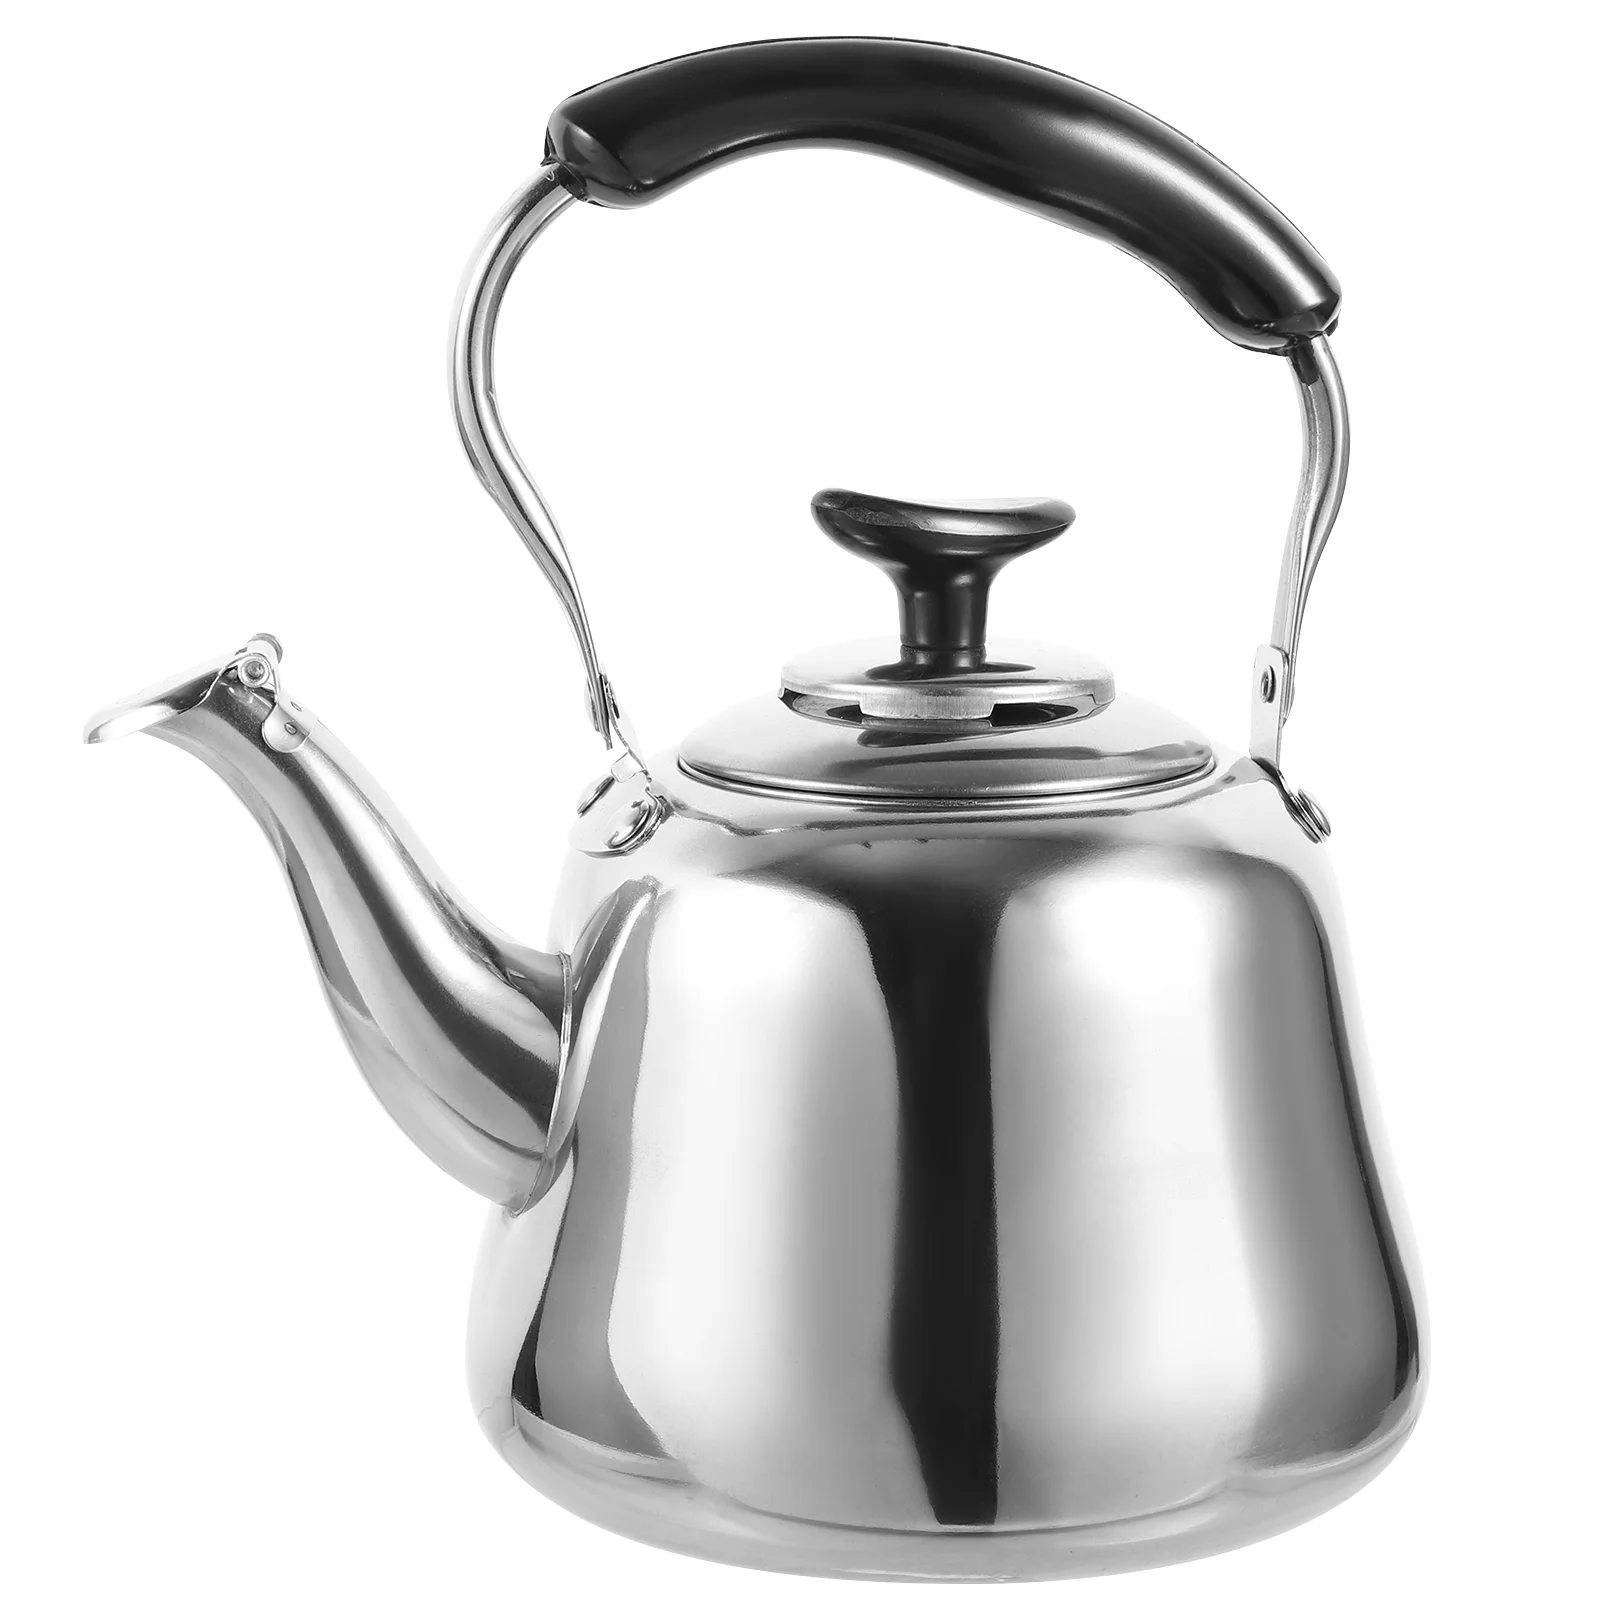 

1/1.5L Stainless Steel Whistle Teakettle Large Capacity Boil Water Kettle With Filter Screen For Induction Cookers Gas Stoves